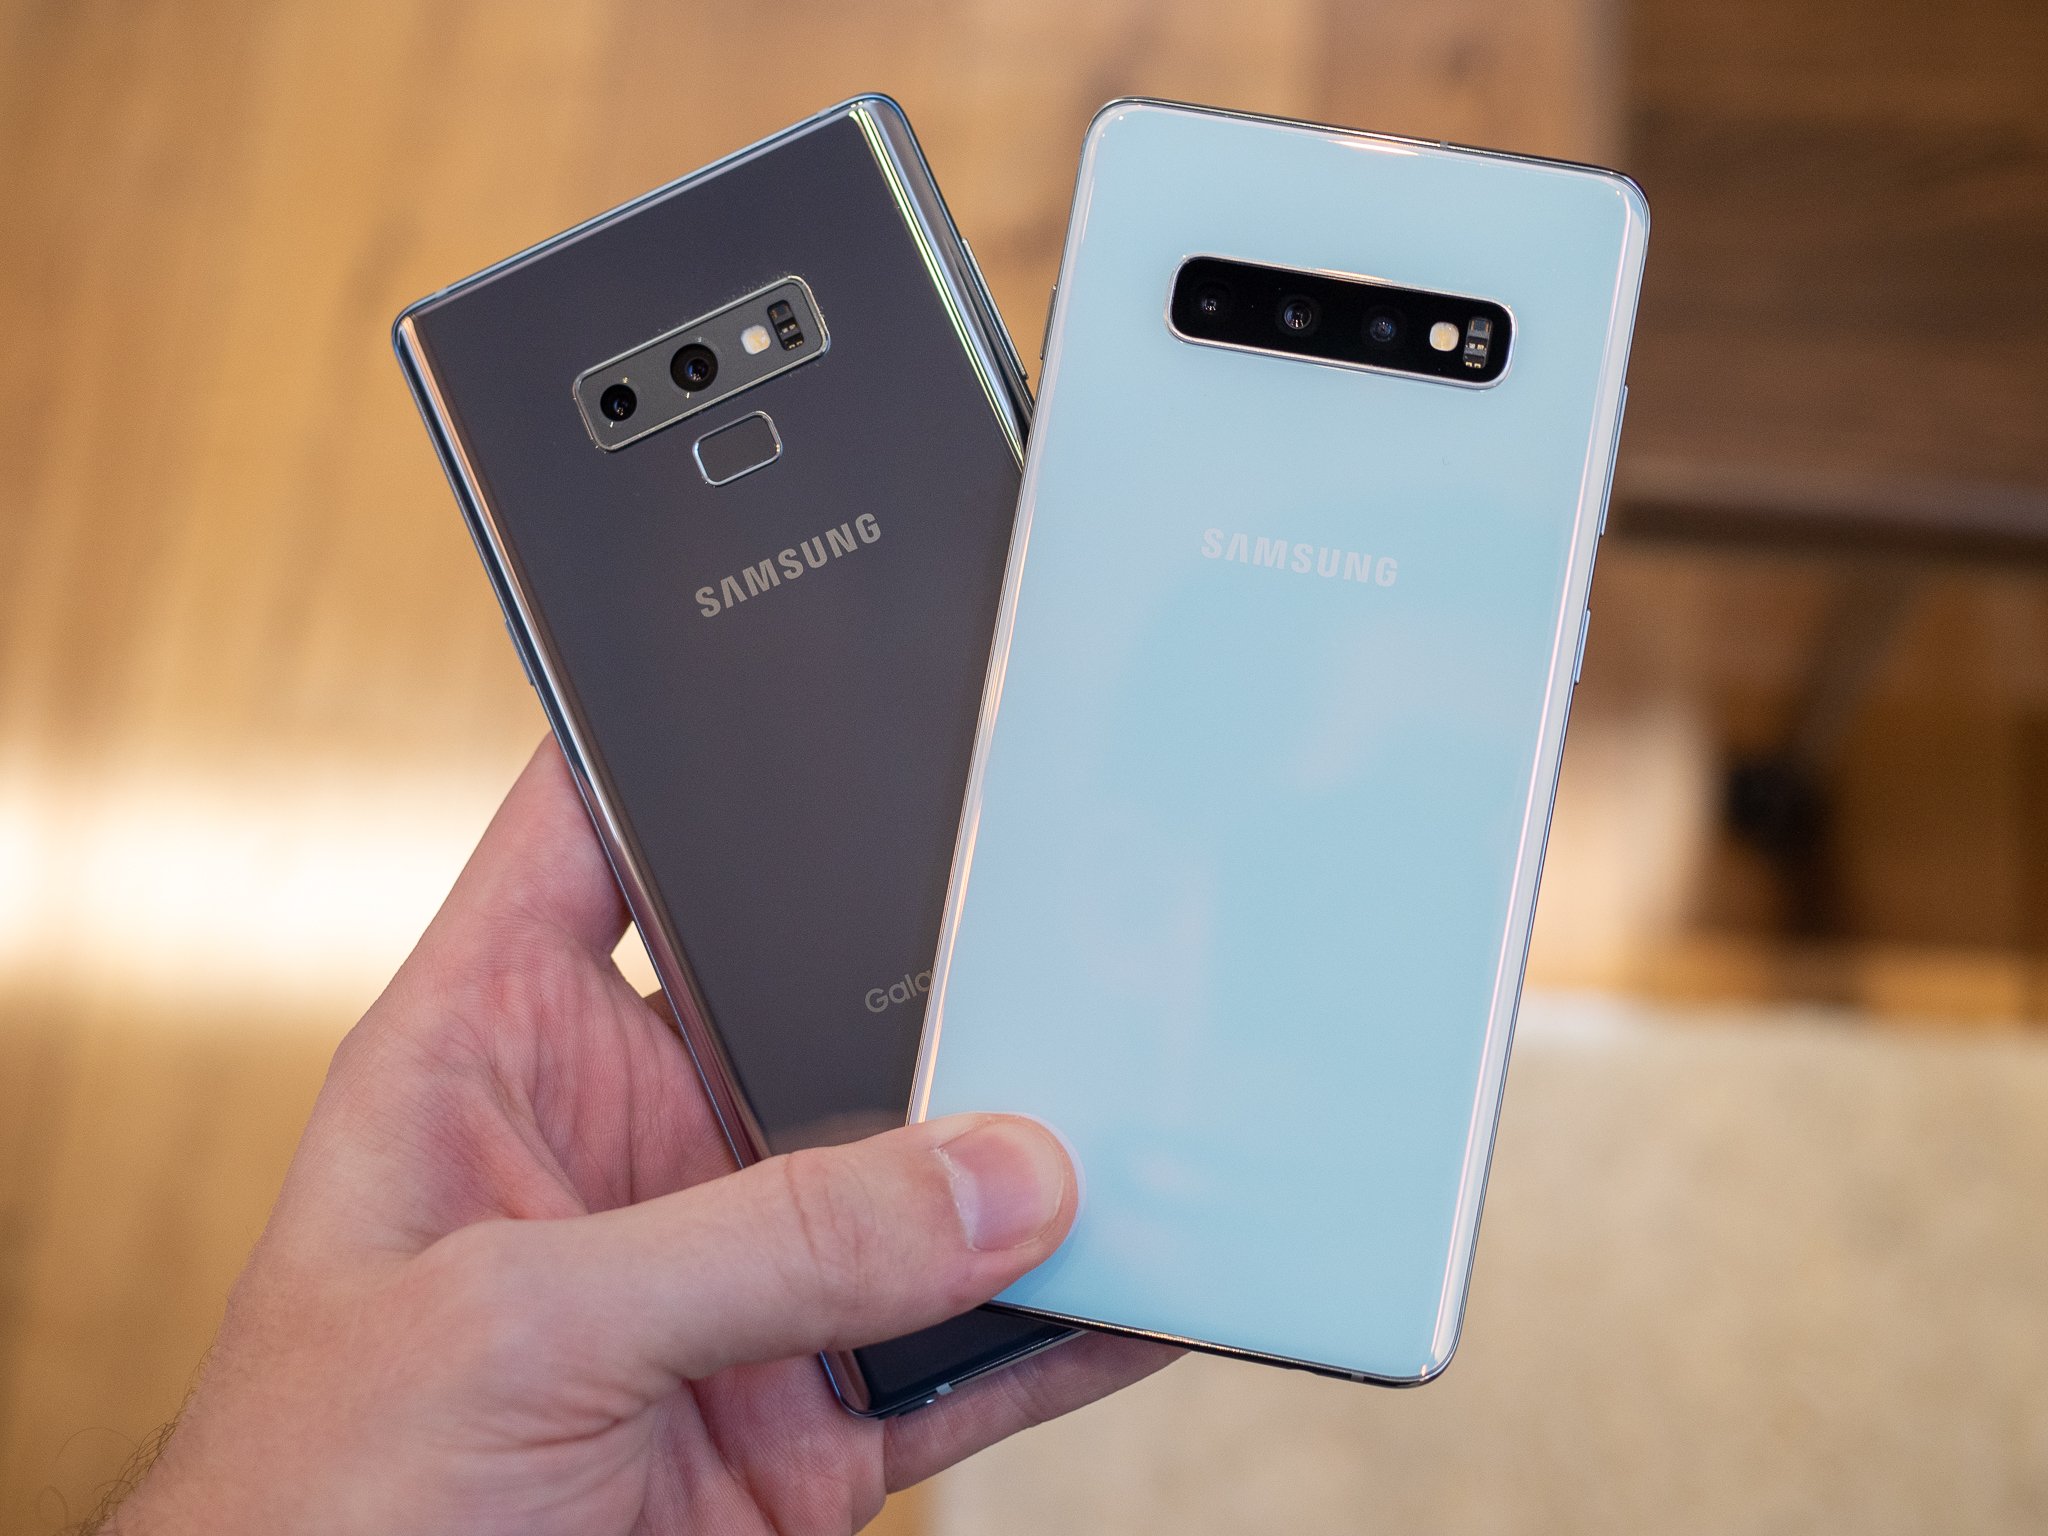 Galaxy S10+ and Galaxy Note 9